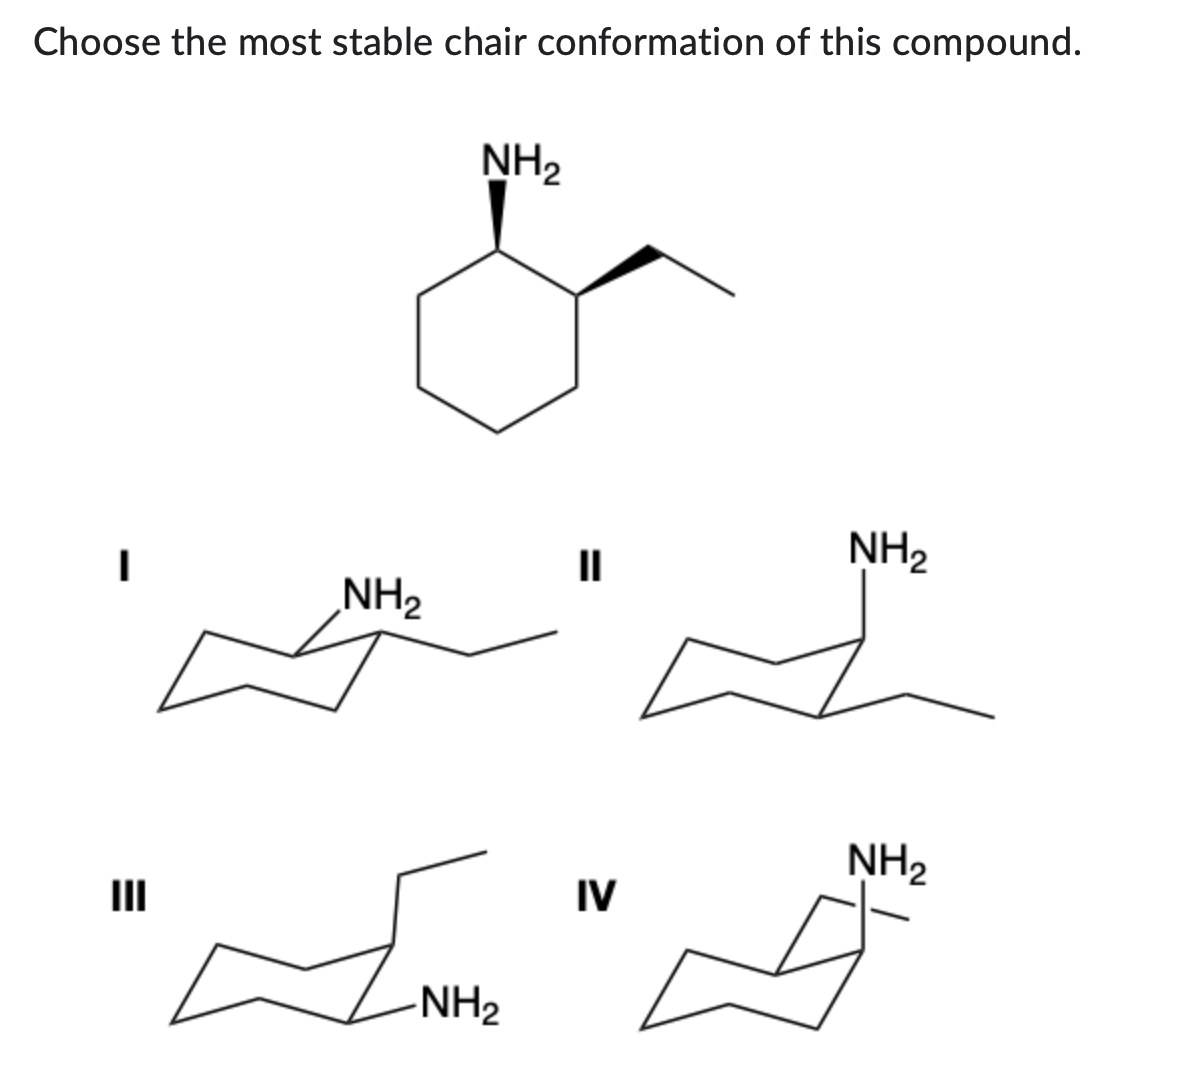 Choose the most stable chair conformation of this compound.
III
NH₂
NH₂
11
-NH₂
تھے کے
NH₂
IV